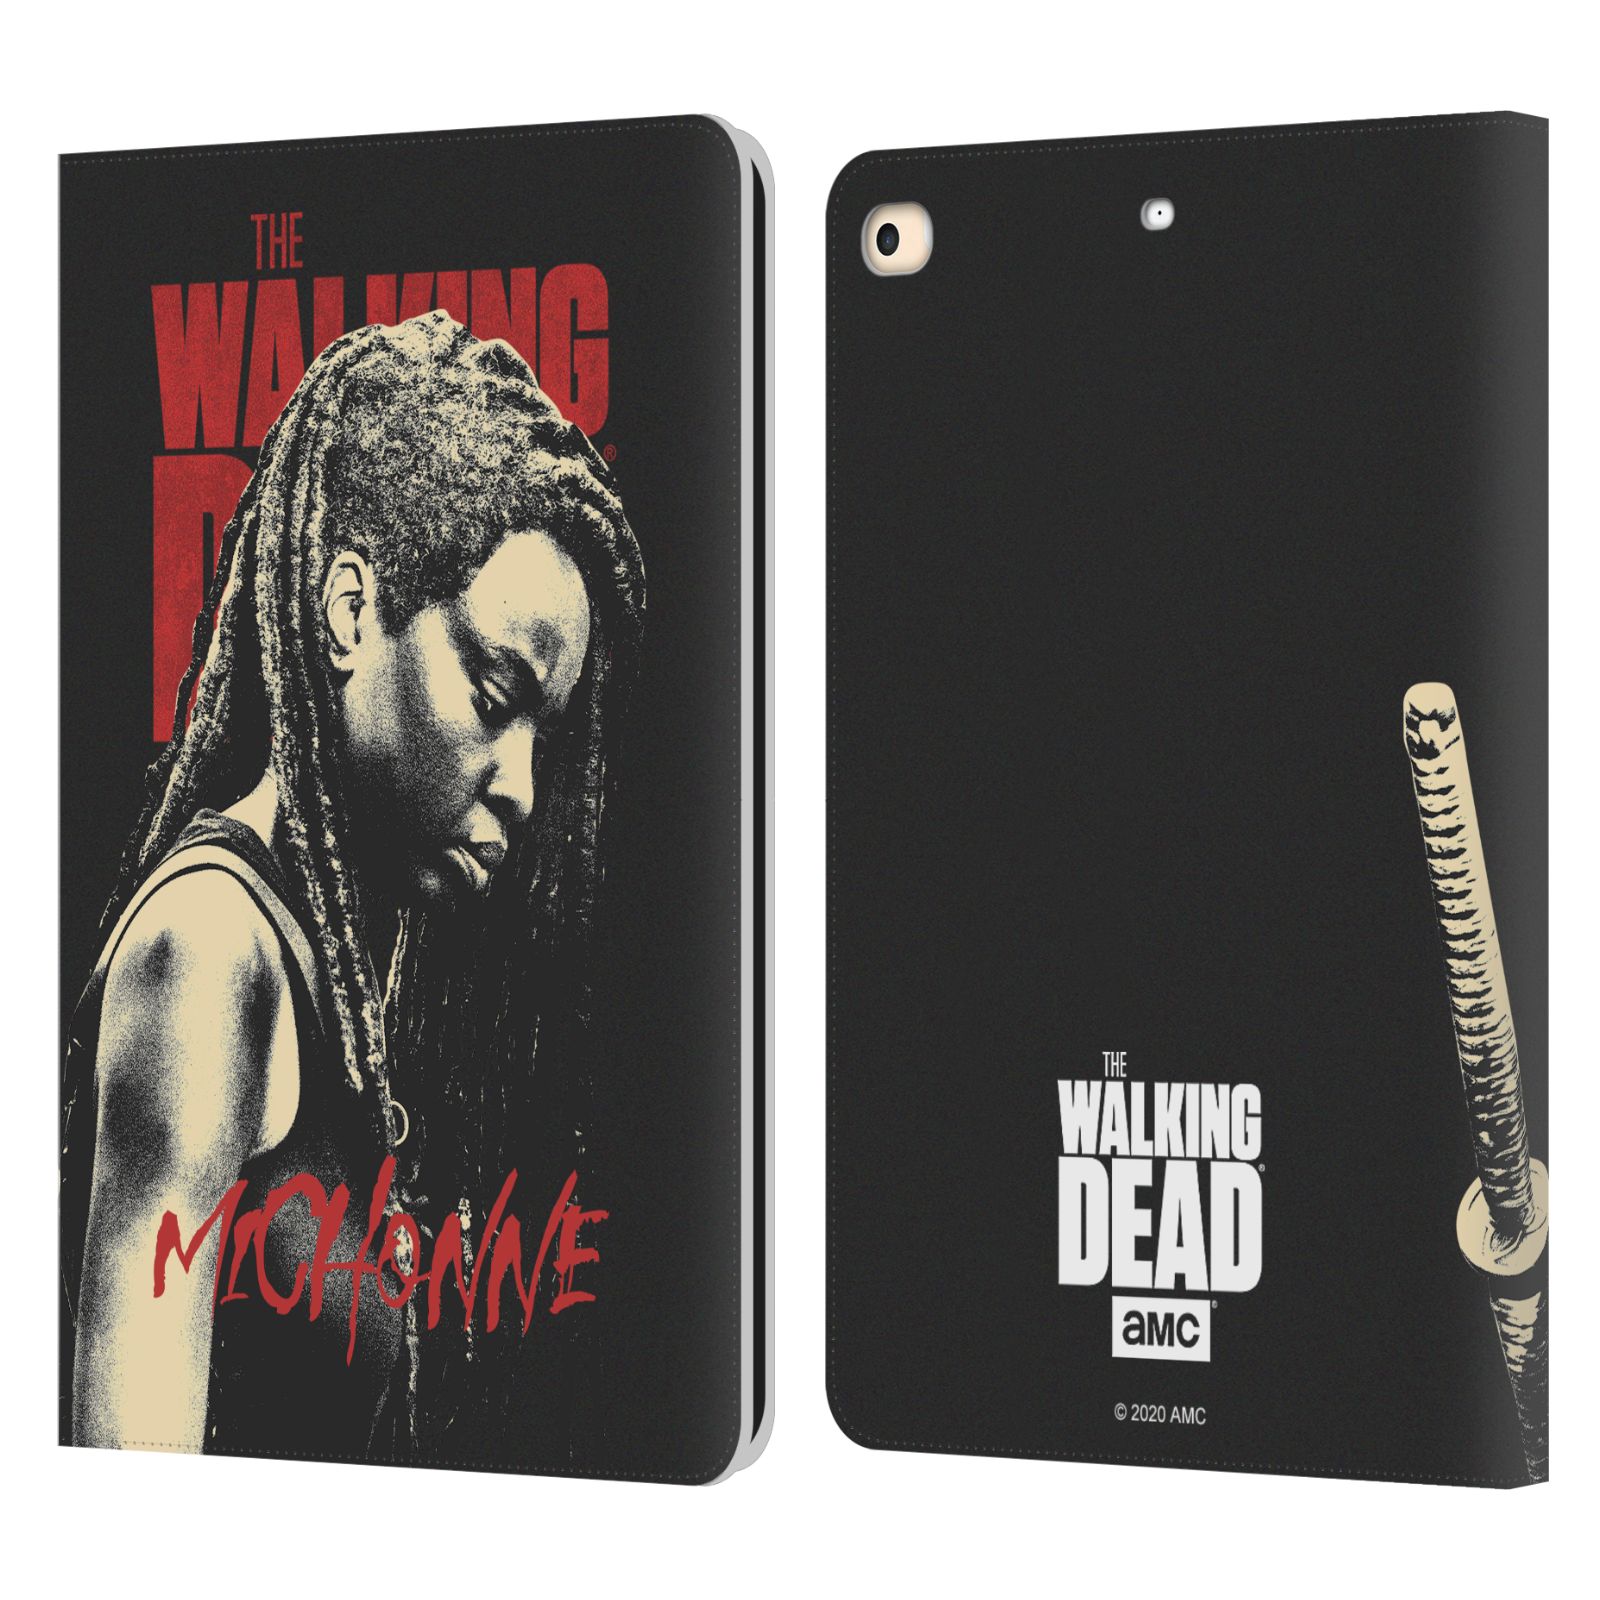 Head Case Designs Officially Licensed AMC The Walking Dead Season 10 Character Portraits Michonne Leather Book Case Compatible with Apple iPad 9.7 2017 / iPad 9.7 2018 - image 1 of 6